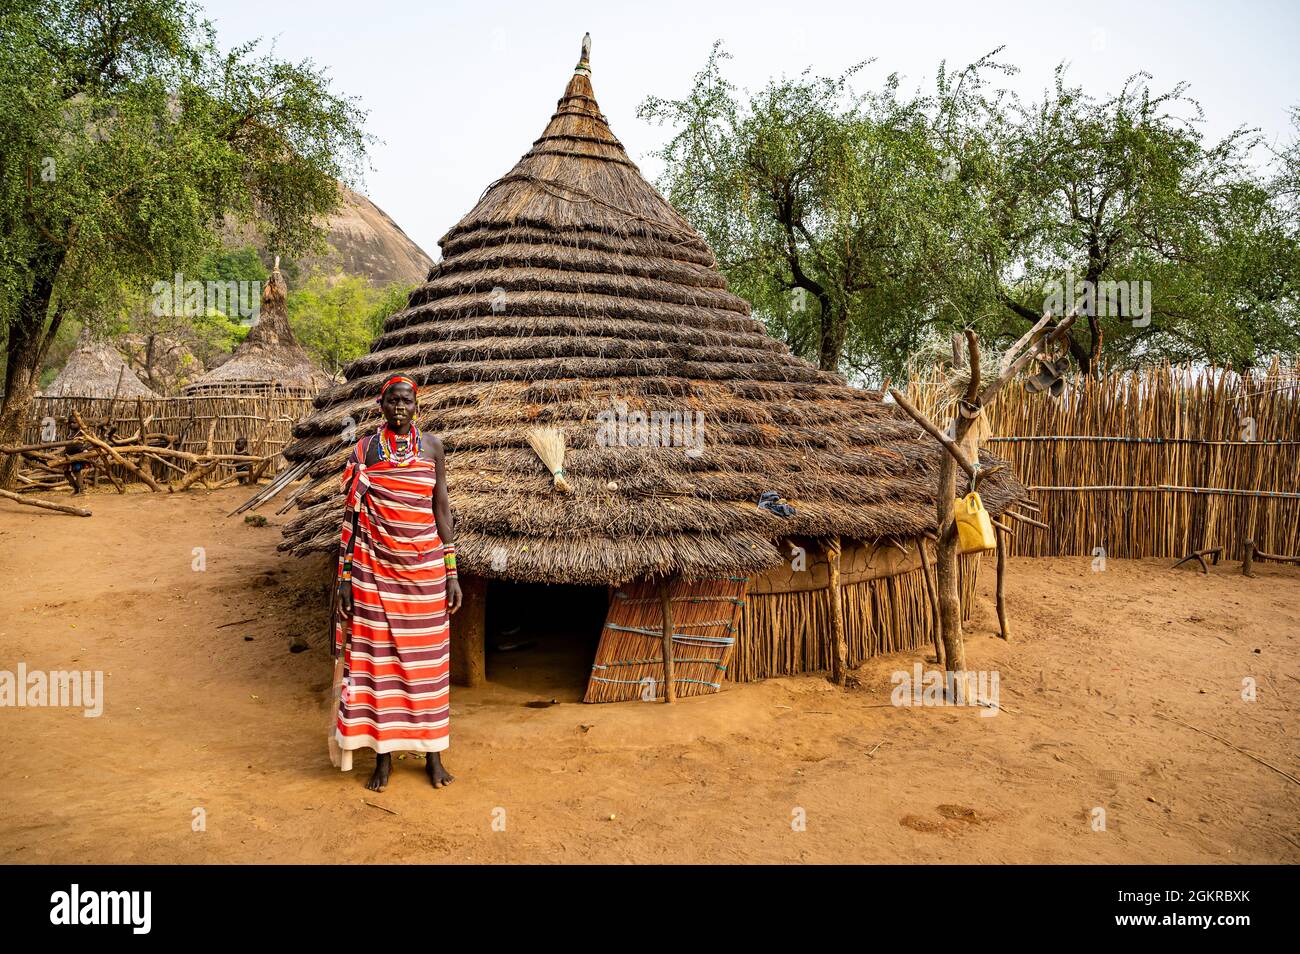 Young women in front of a traditional village hut of the Laarim tribe, Boya Hills, Eastern Equatoria, South Sudan, Africa Stock Photo